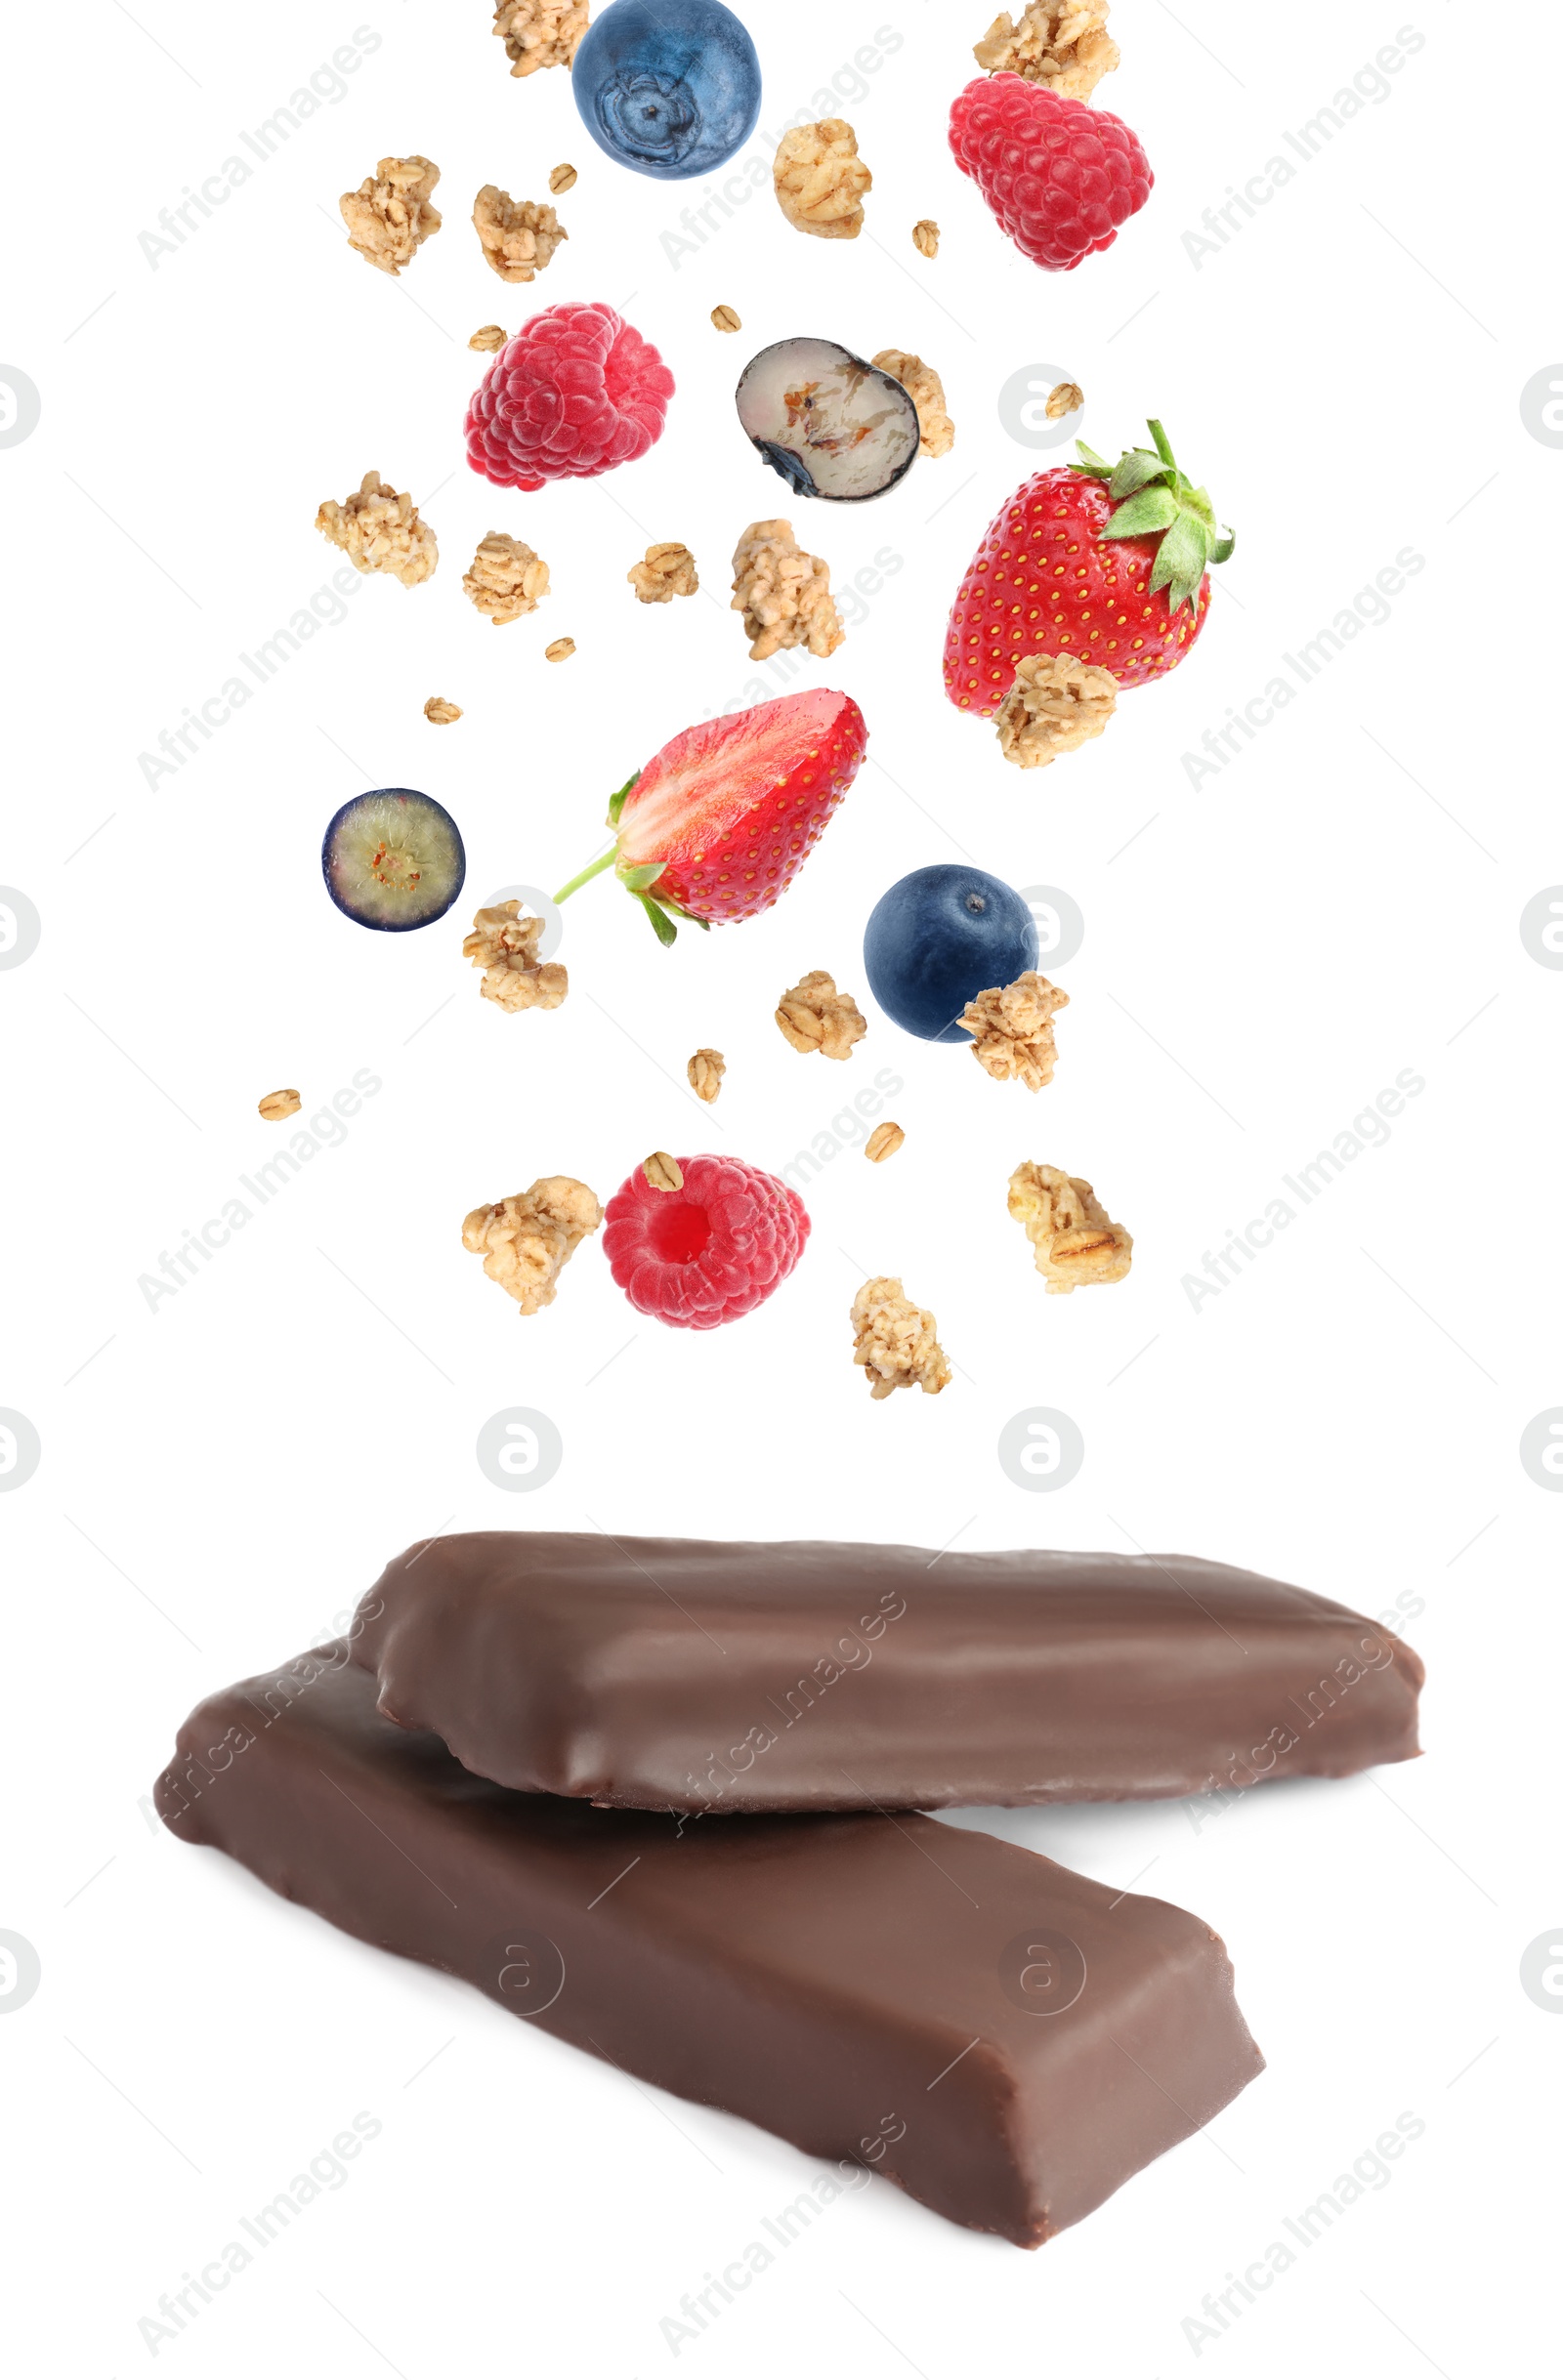 Image of Tasty chocolate glazed protein bars and granola with berries falling on white background